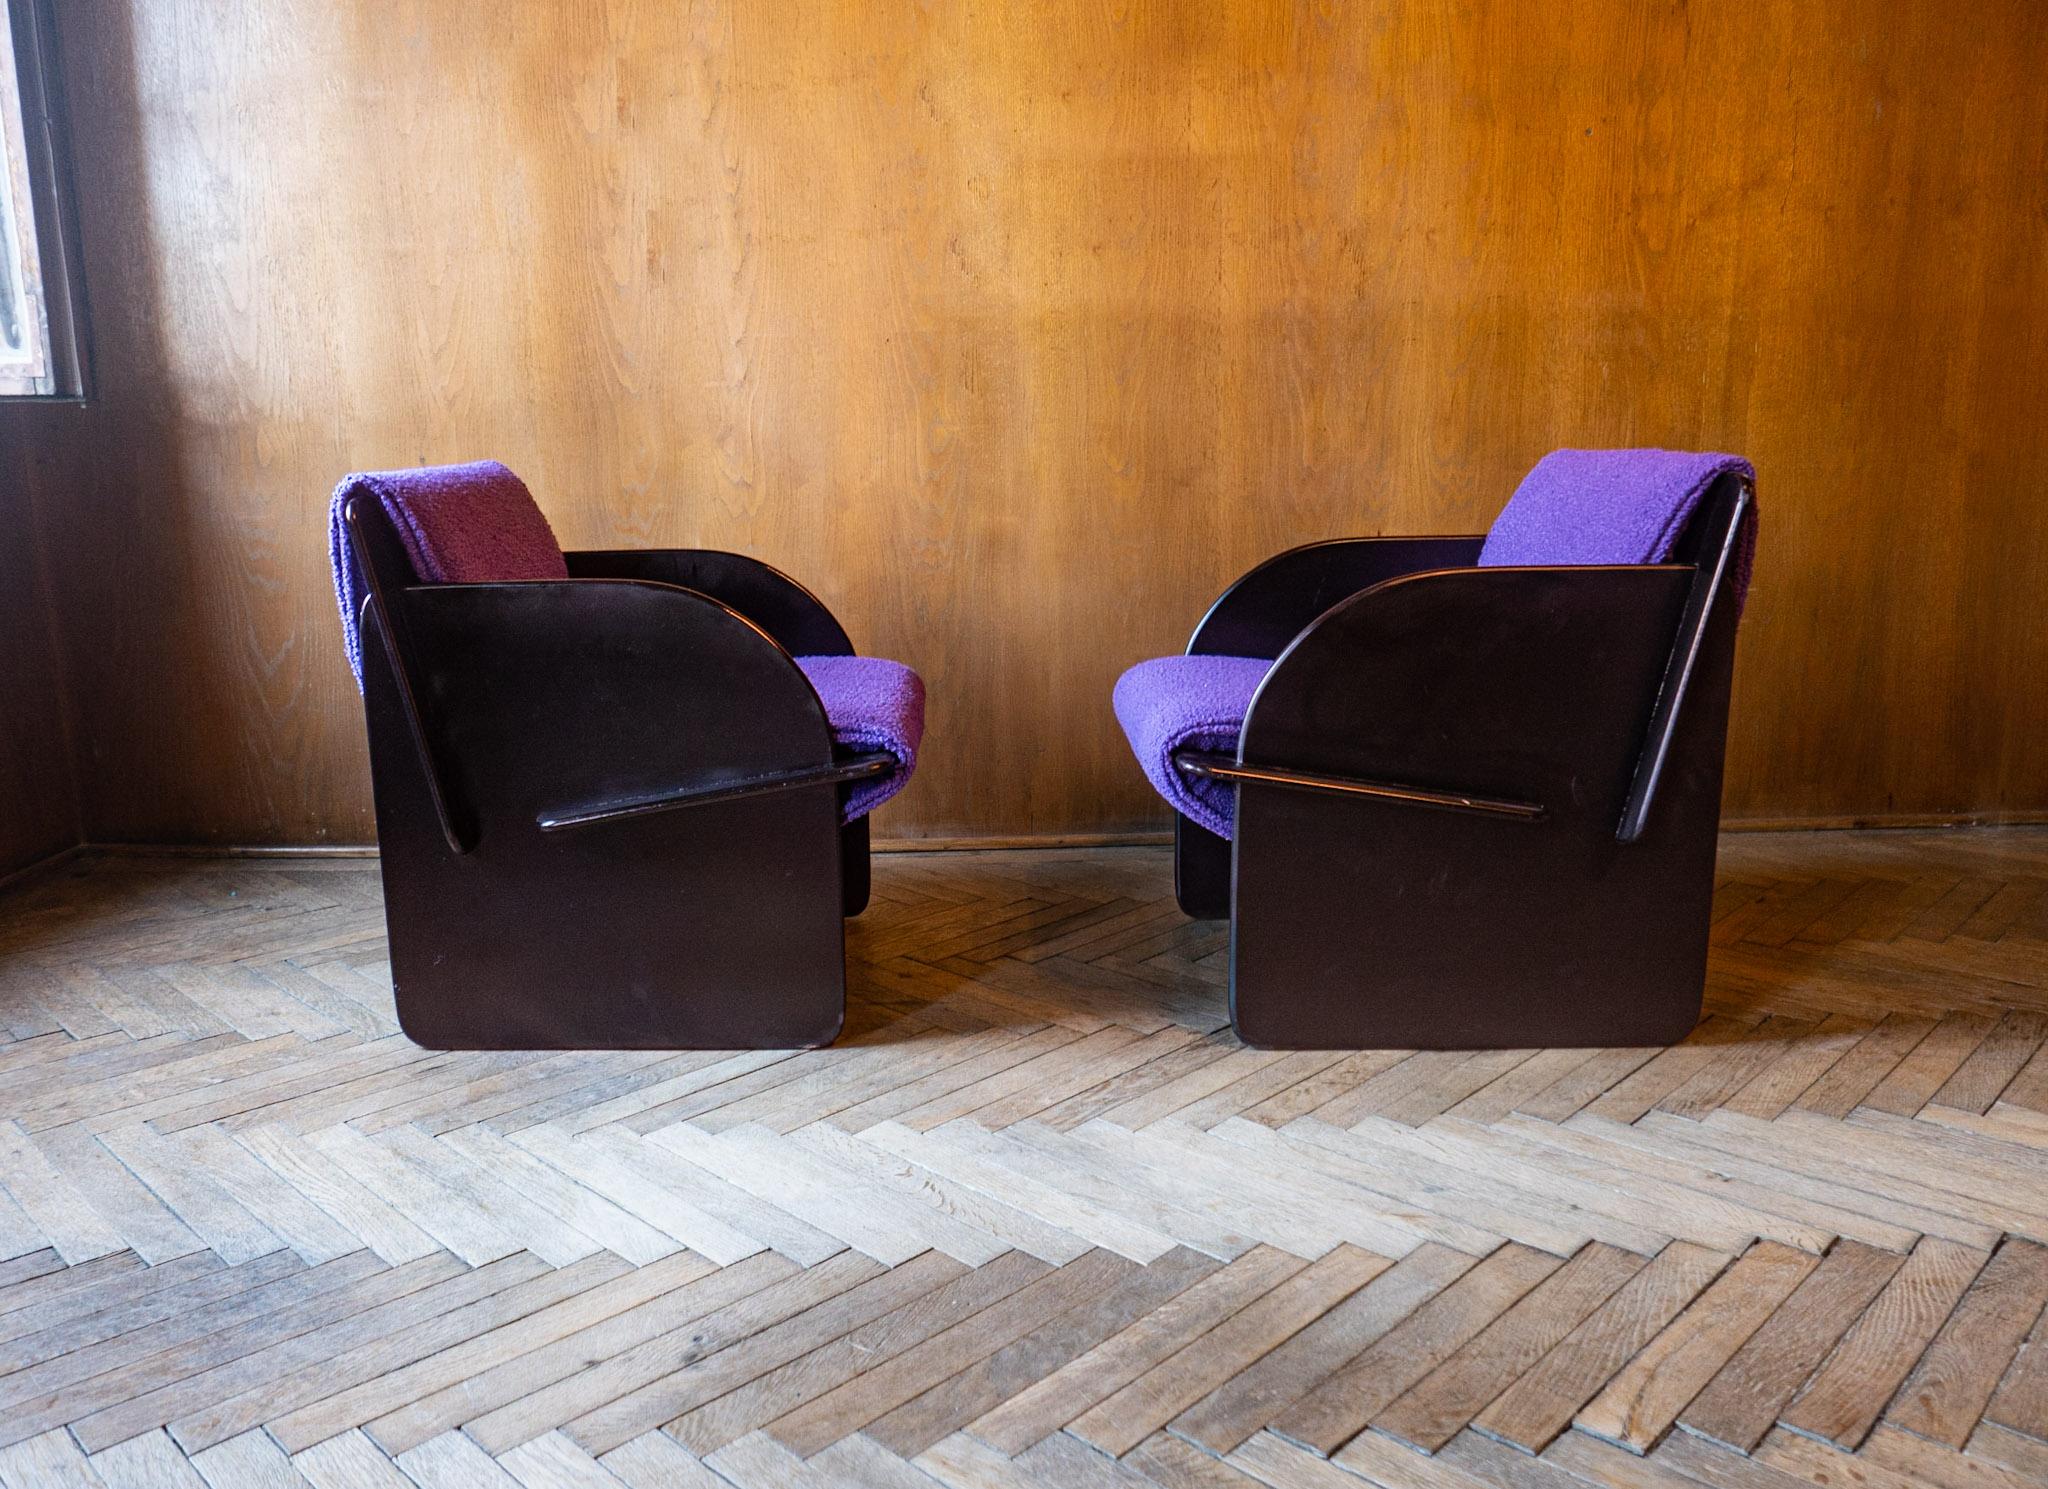 Mid-century Modern space age purple bouclé chairs, Italy 1970s.

This pair of Italian black armchairs with purple bouclé from the 1970s is made of black varnished wood and upholstered in purple bouclé fabric. The particularity of the armchairs are